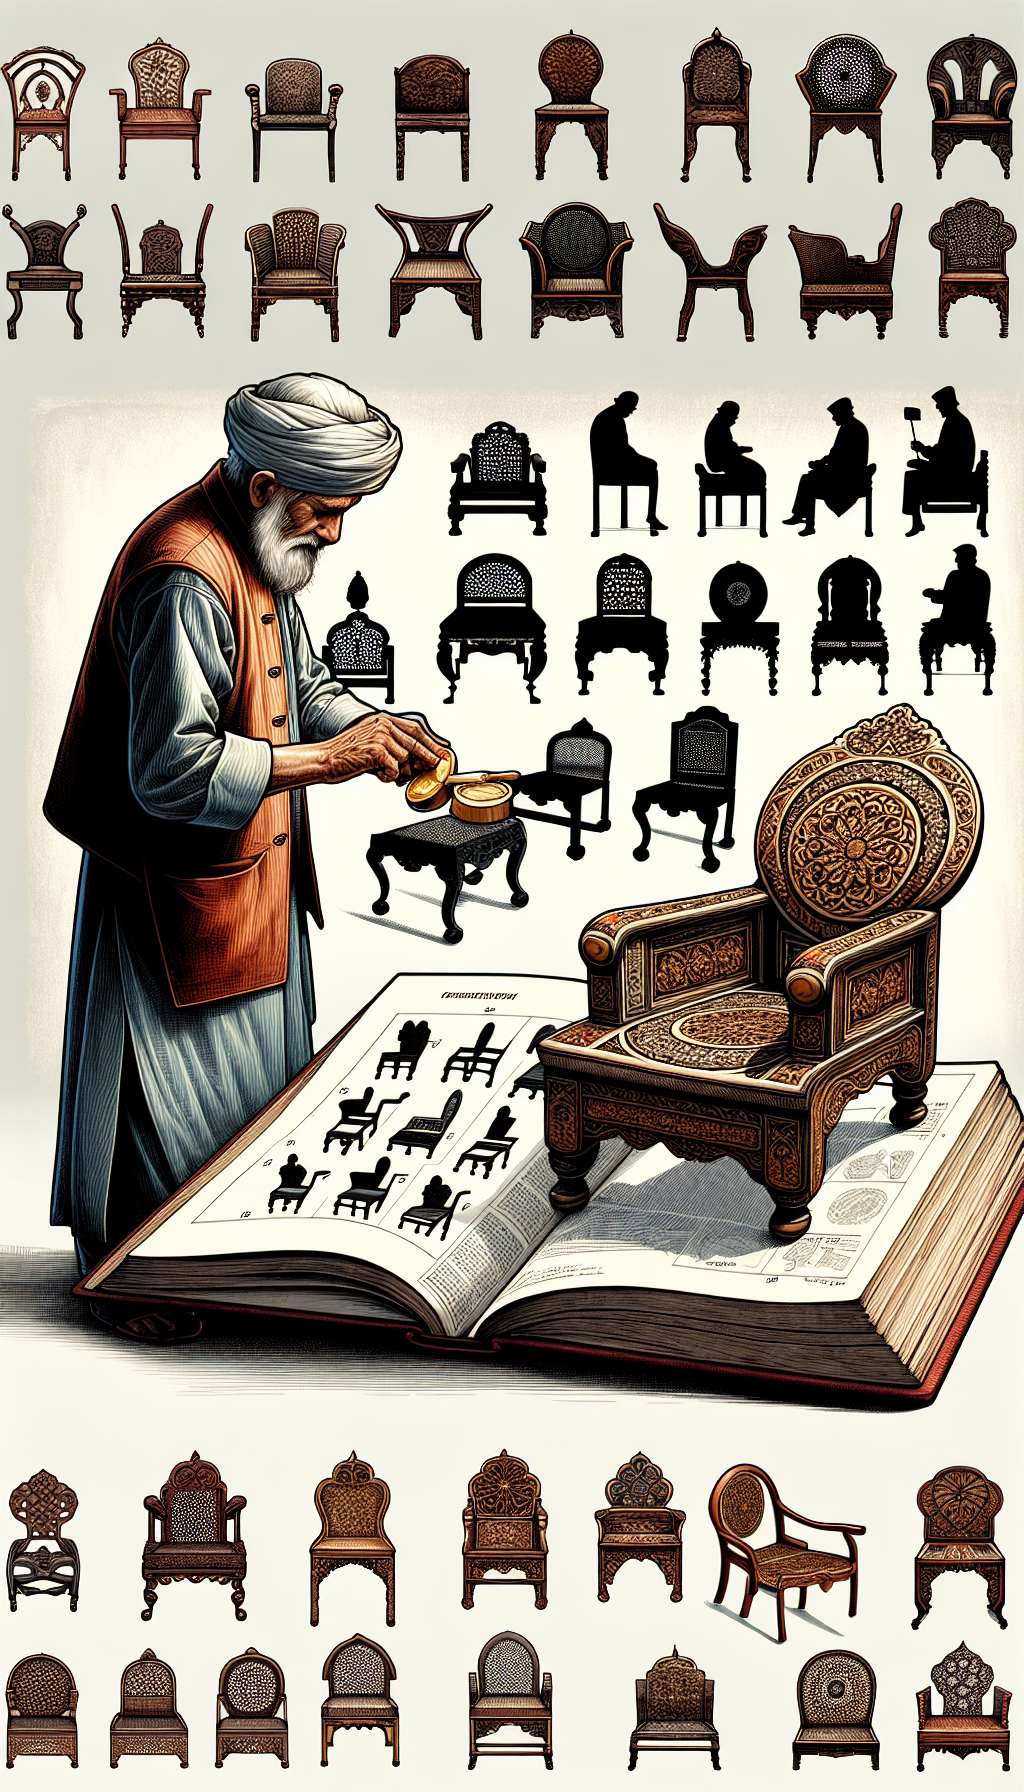 An illustrated elderly person carefully applying beeswax to a majestic, ornate antique chair, the grain and craftsmanship highlighted with loving detail. Beside him, an open book depicts silhouettes of various chair styles, each with a clear label, suggesting it's an identification guide. The image is framed by delicate vintage patterns to evoke nostalgia.

16:9